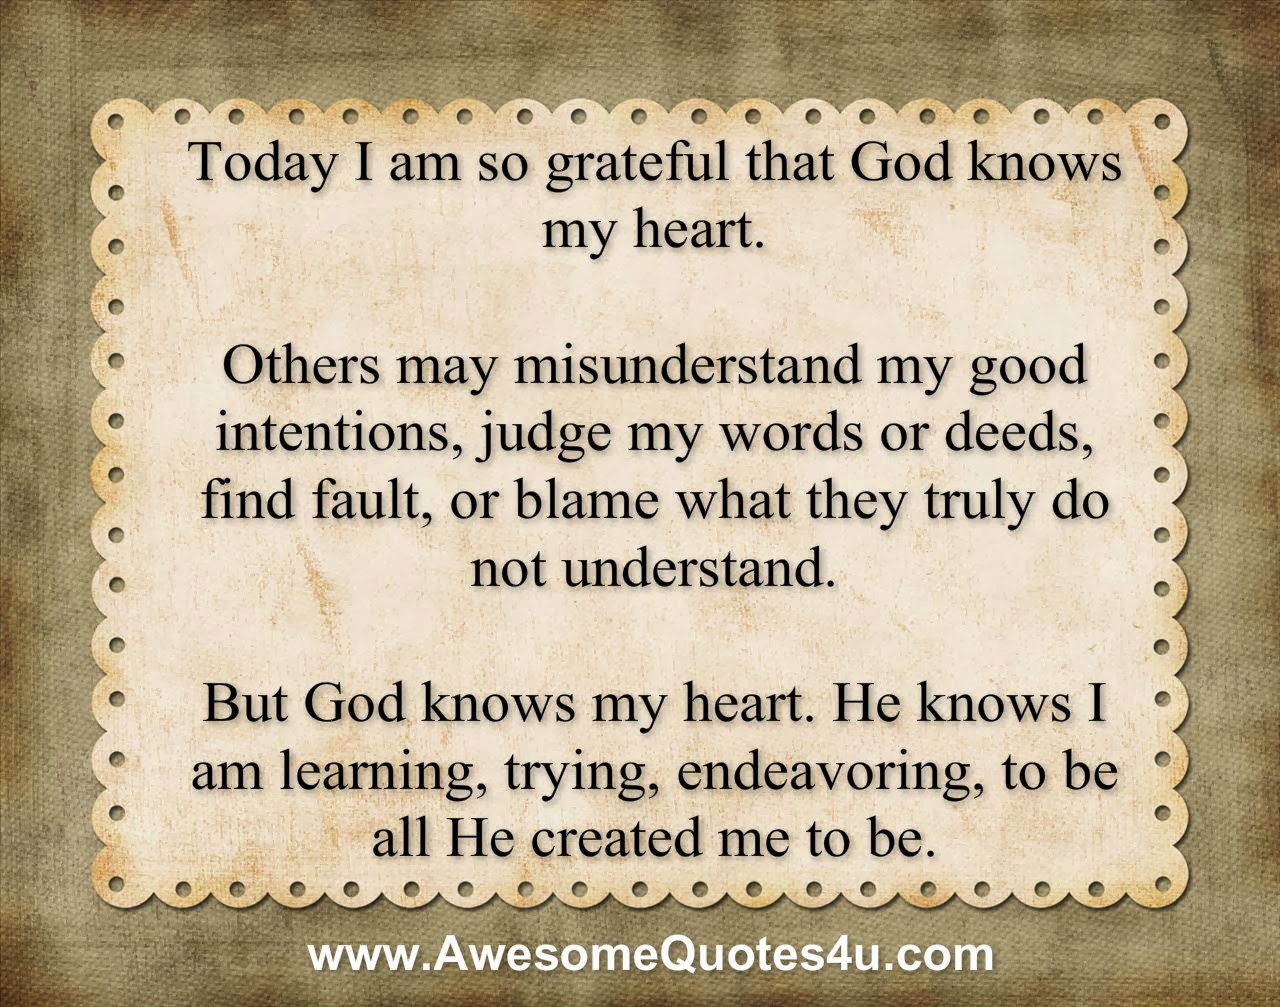 Awesomequotes4u.com: TODAY I AM SO GRATEFUL THAT GOD KNOWS MY HEART.